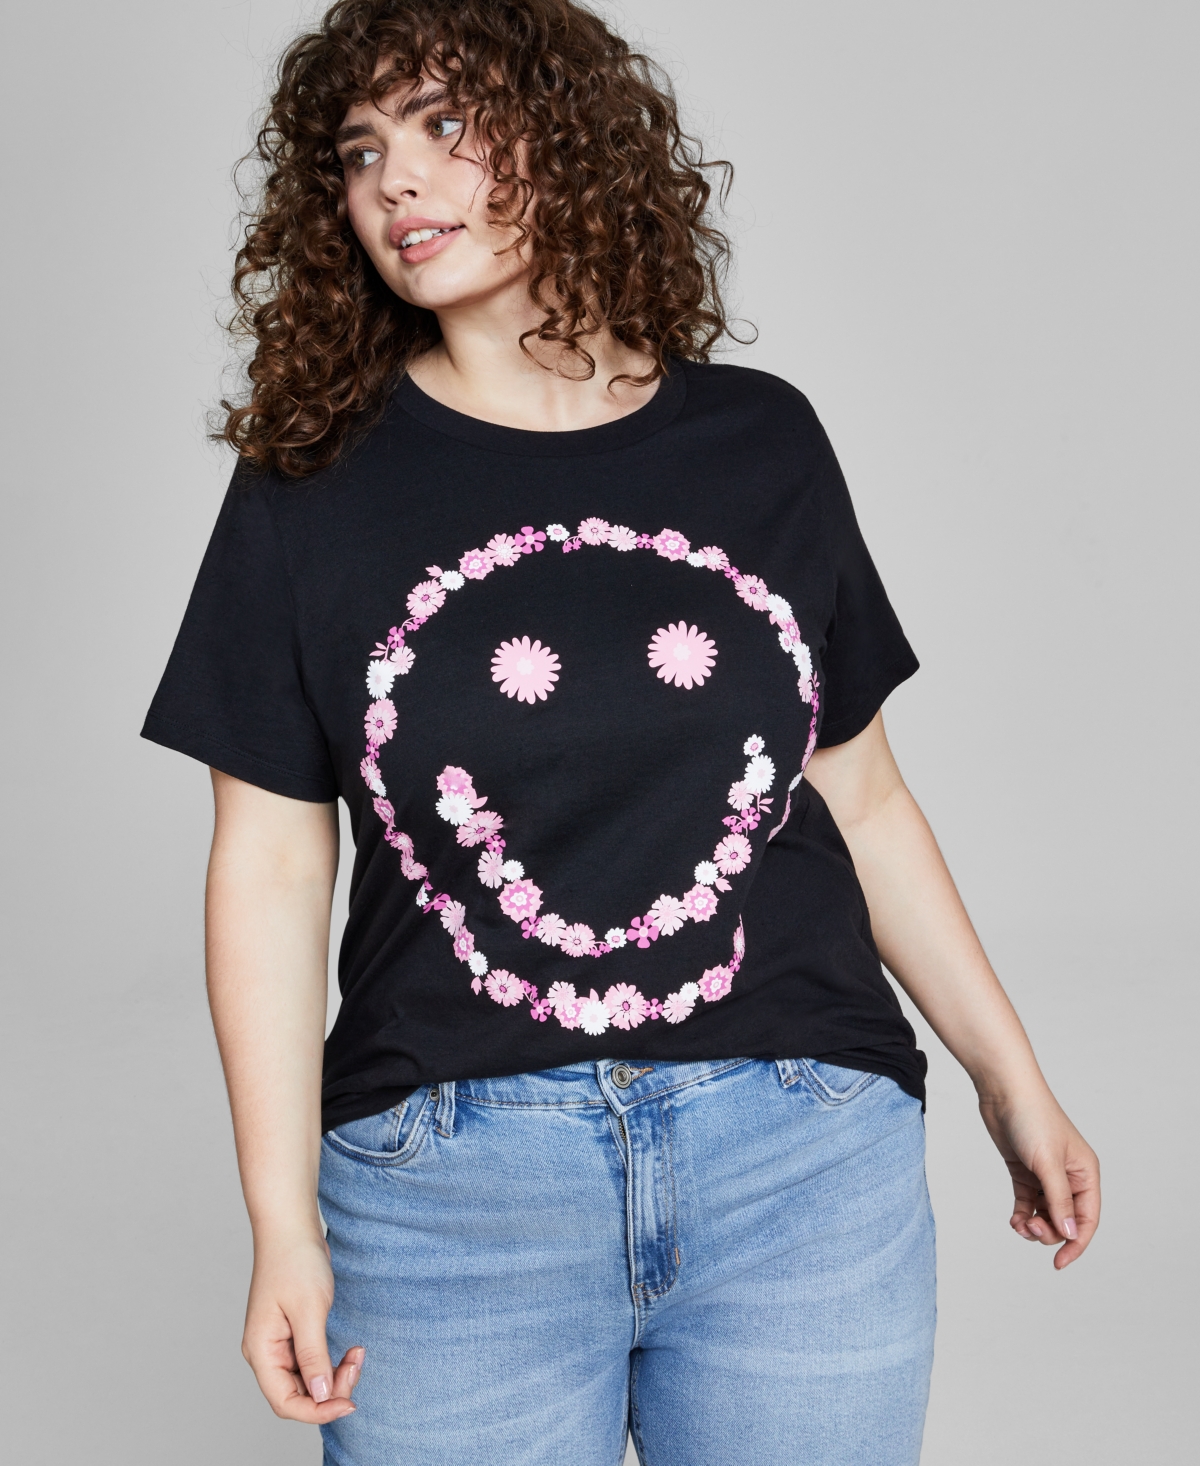 Grayson Threads Black Trendy Plus Size Short-sleeve Floral Smiley T-shirt In Jet Black